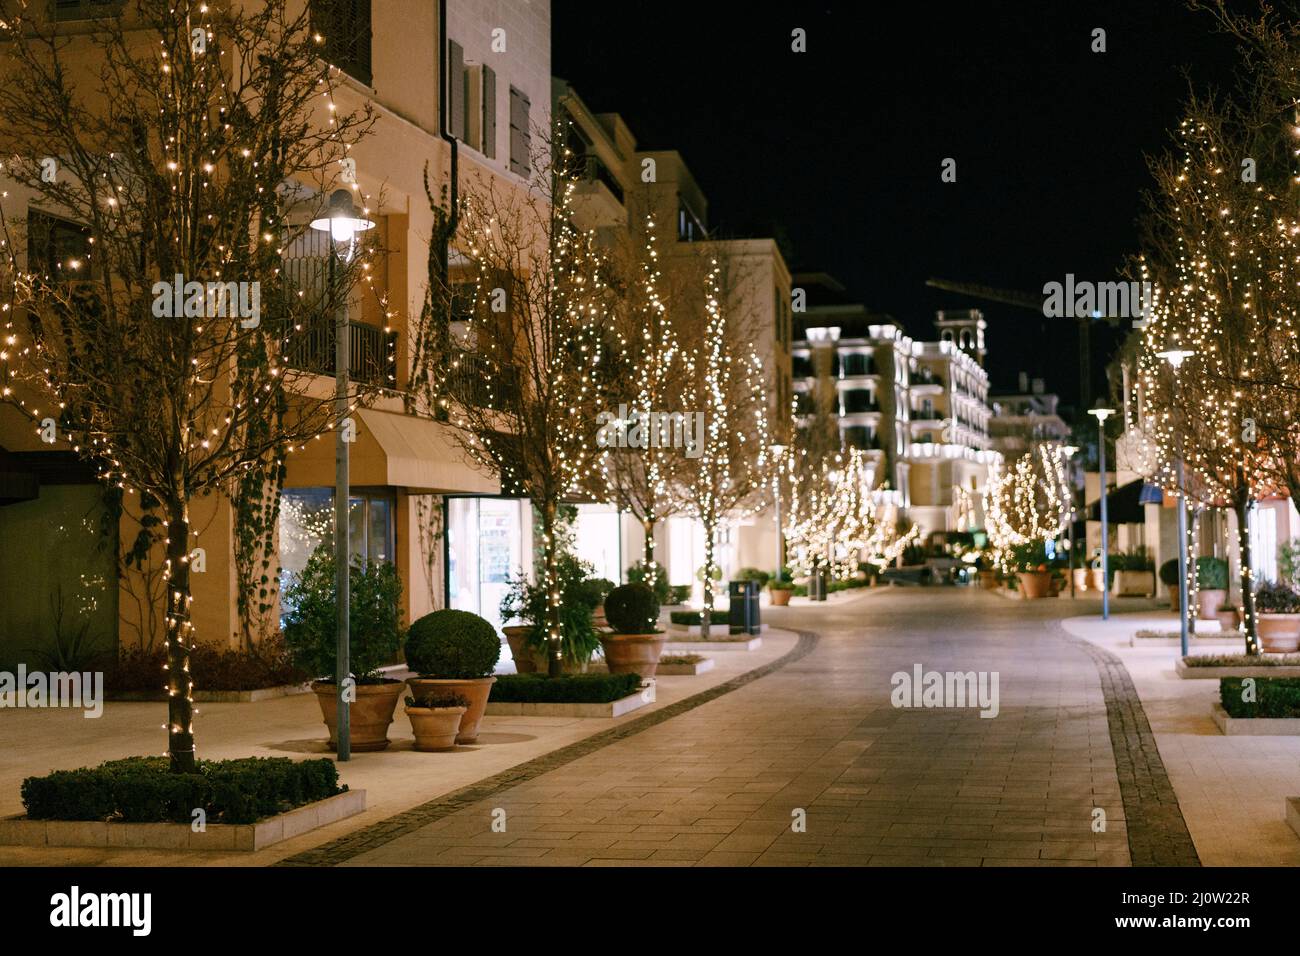 Trees on the street decorated with garlands for Christmas. Stock Photo